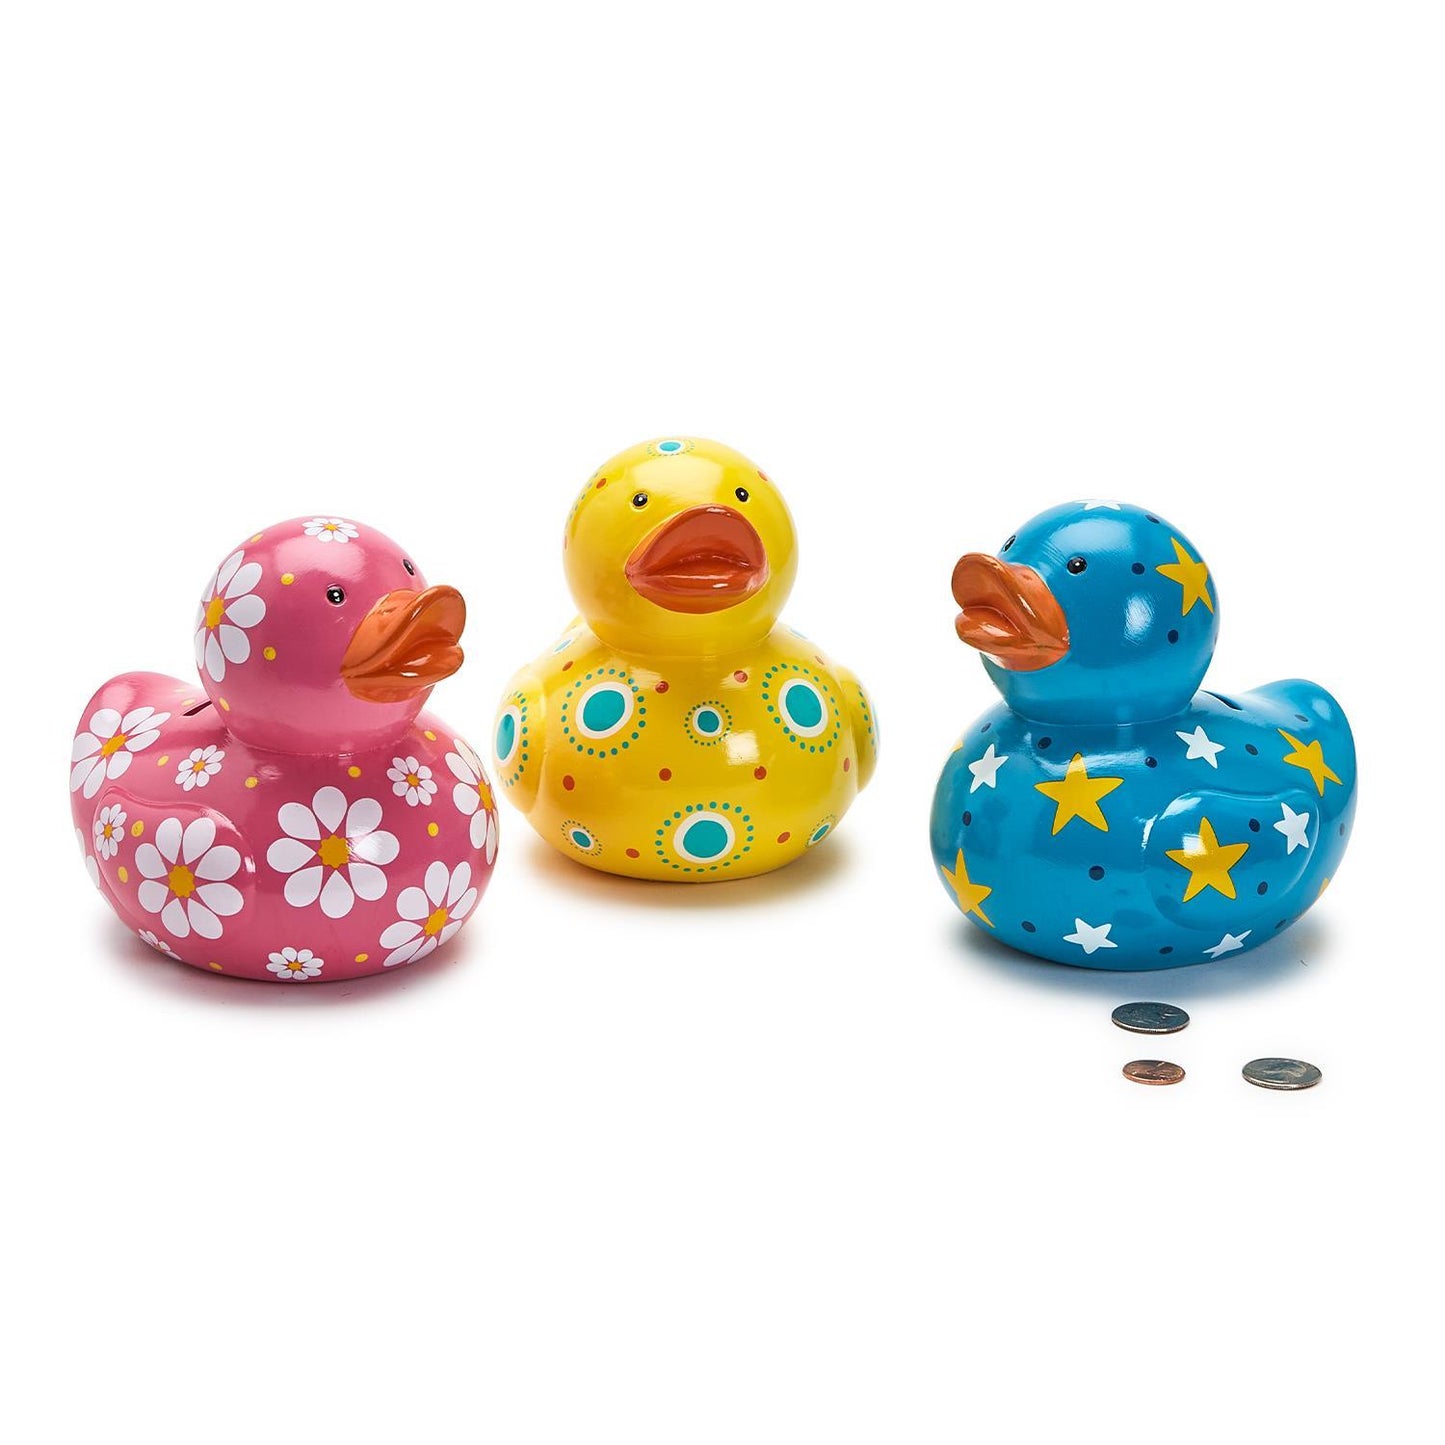 Two's Company Duckie Money Bank in Gift Box Assorted 3 Patters/Colors